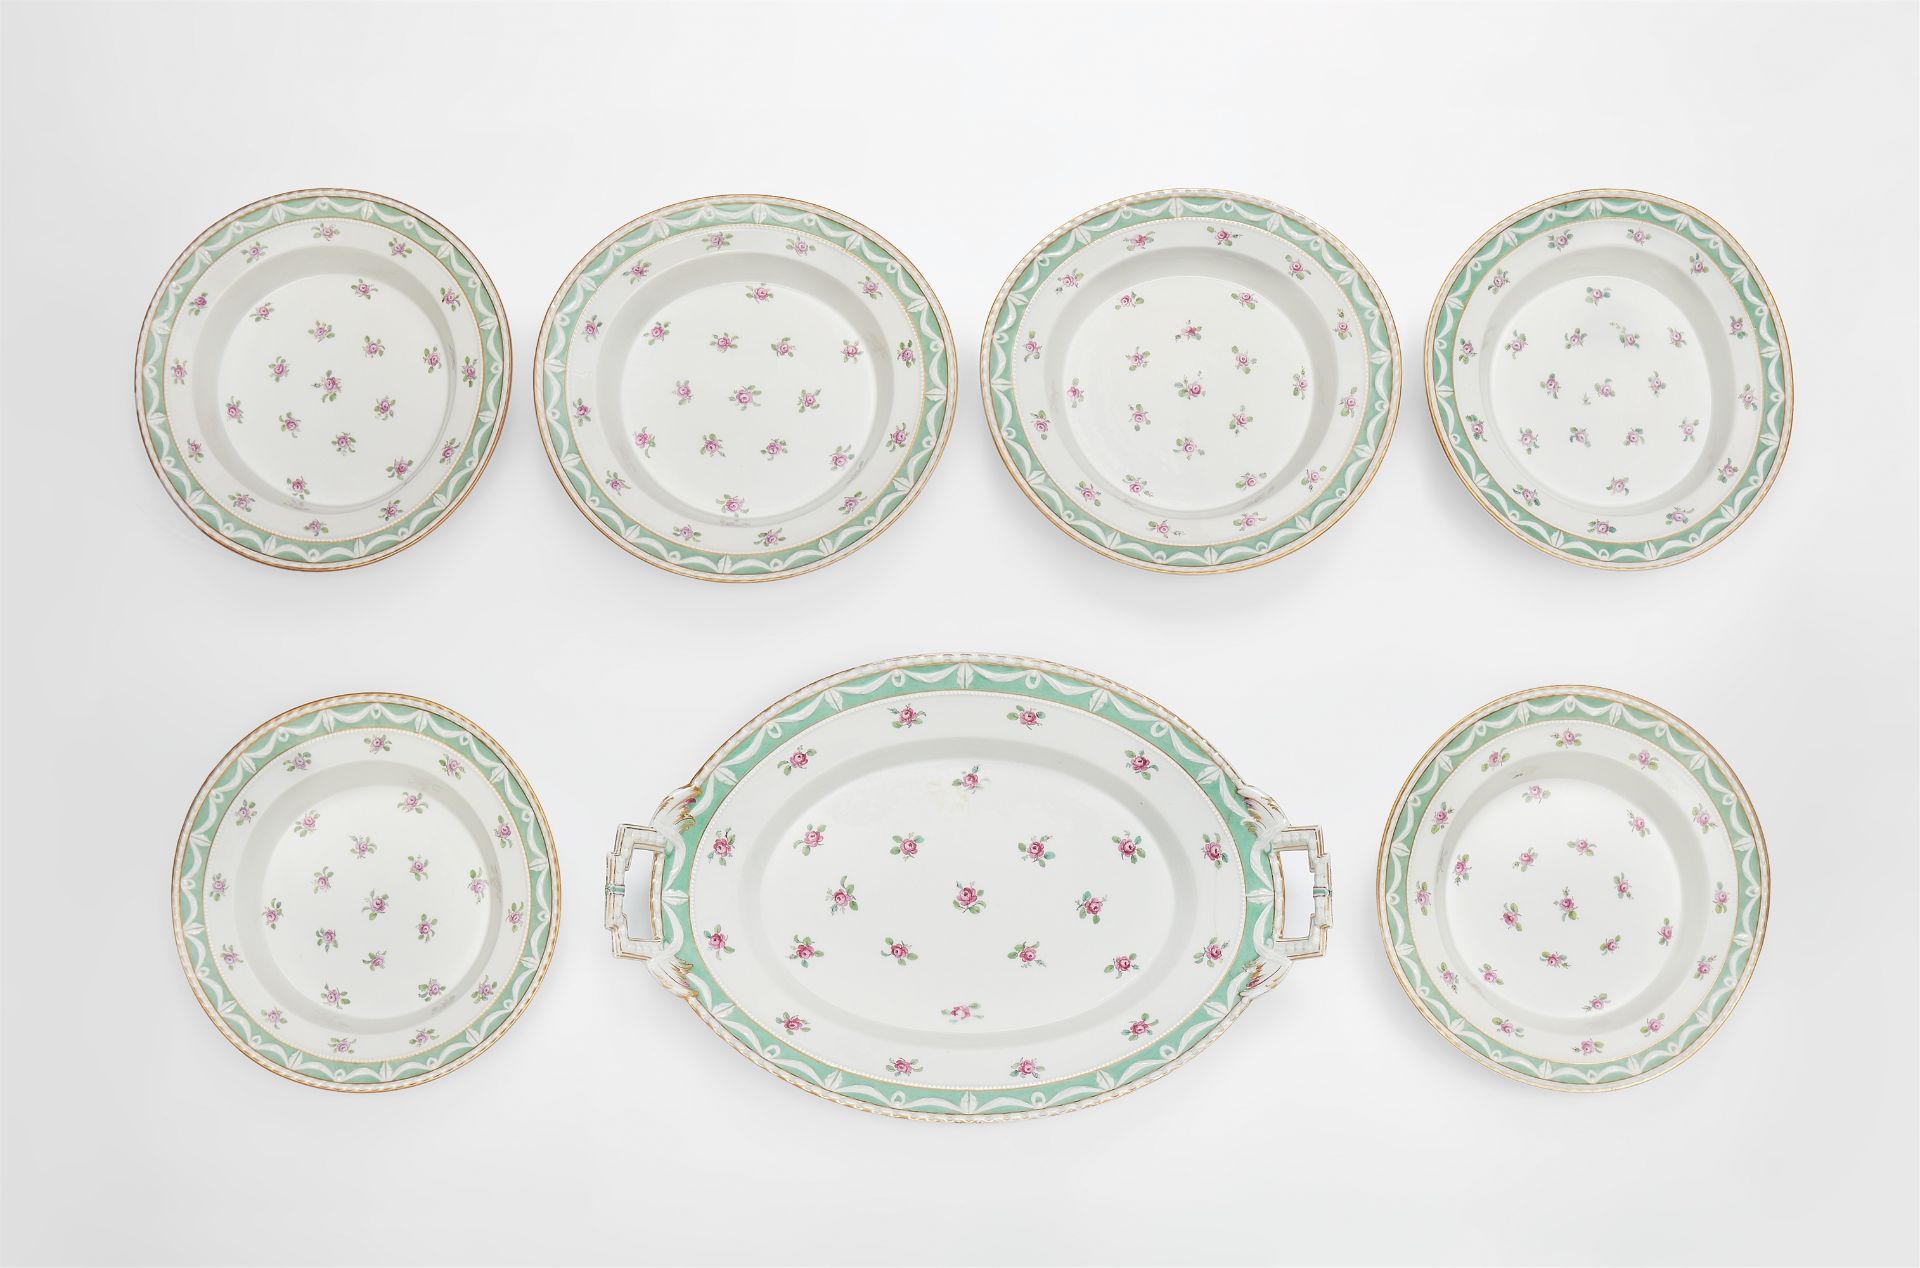 Six dishes and an oval platter from the dinner service with roses for the wedding of Princess August